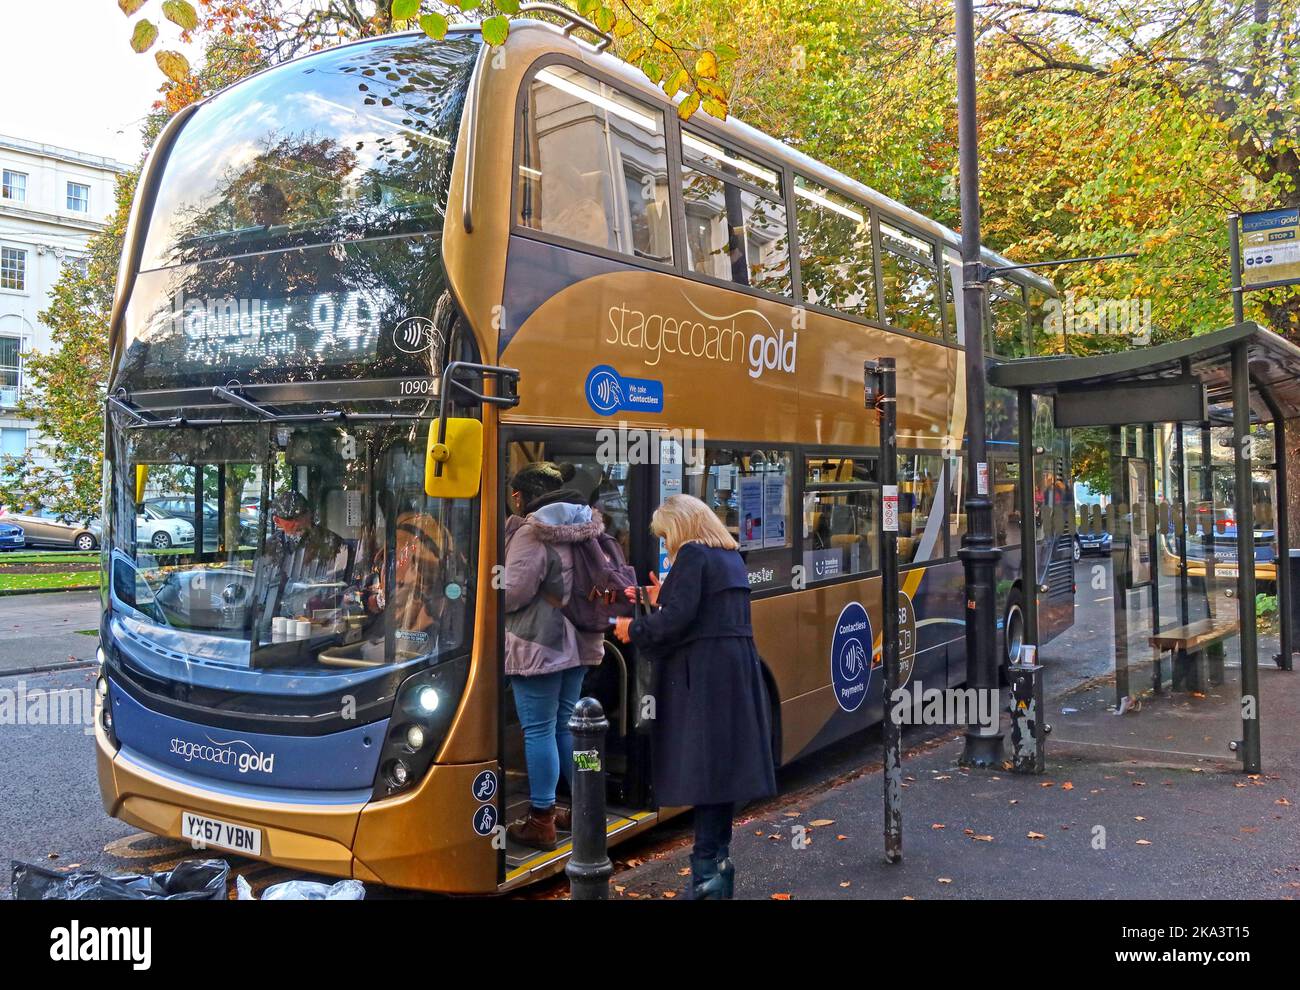 Stagecoach Gold bus 94X to Gloucester in Cheltenham 10904, reg YX67VBN Stock Photo